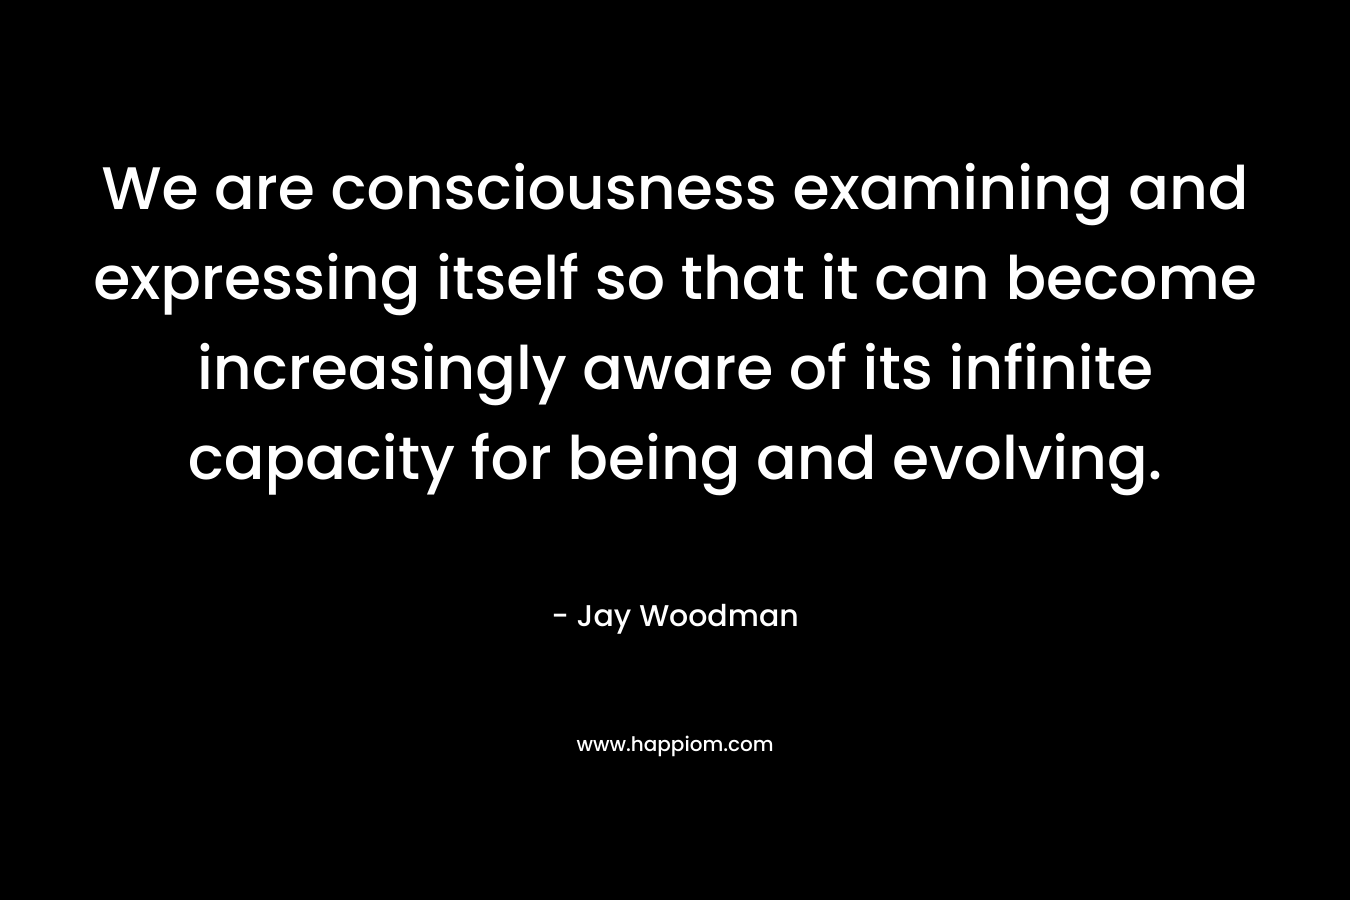 We are consciousness examining and expressing itself so that it can become increasingly aware of its infinite capacity for being and evolving. – Jay Woodman